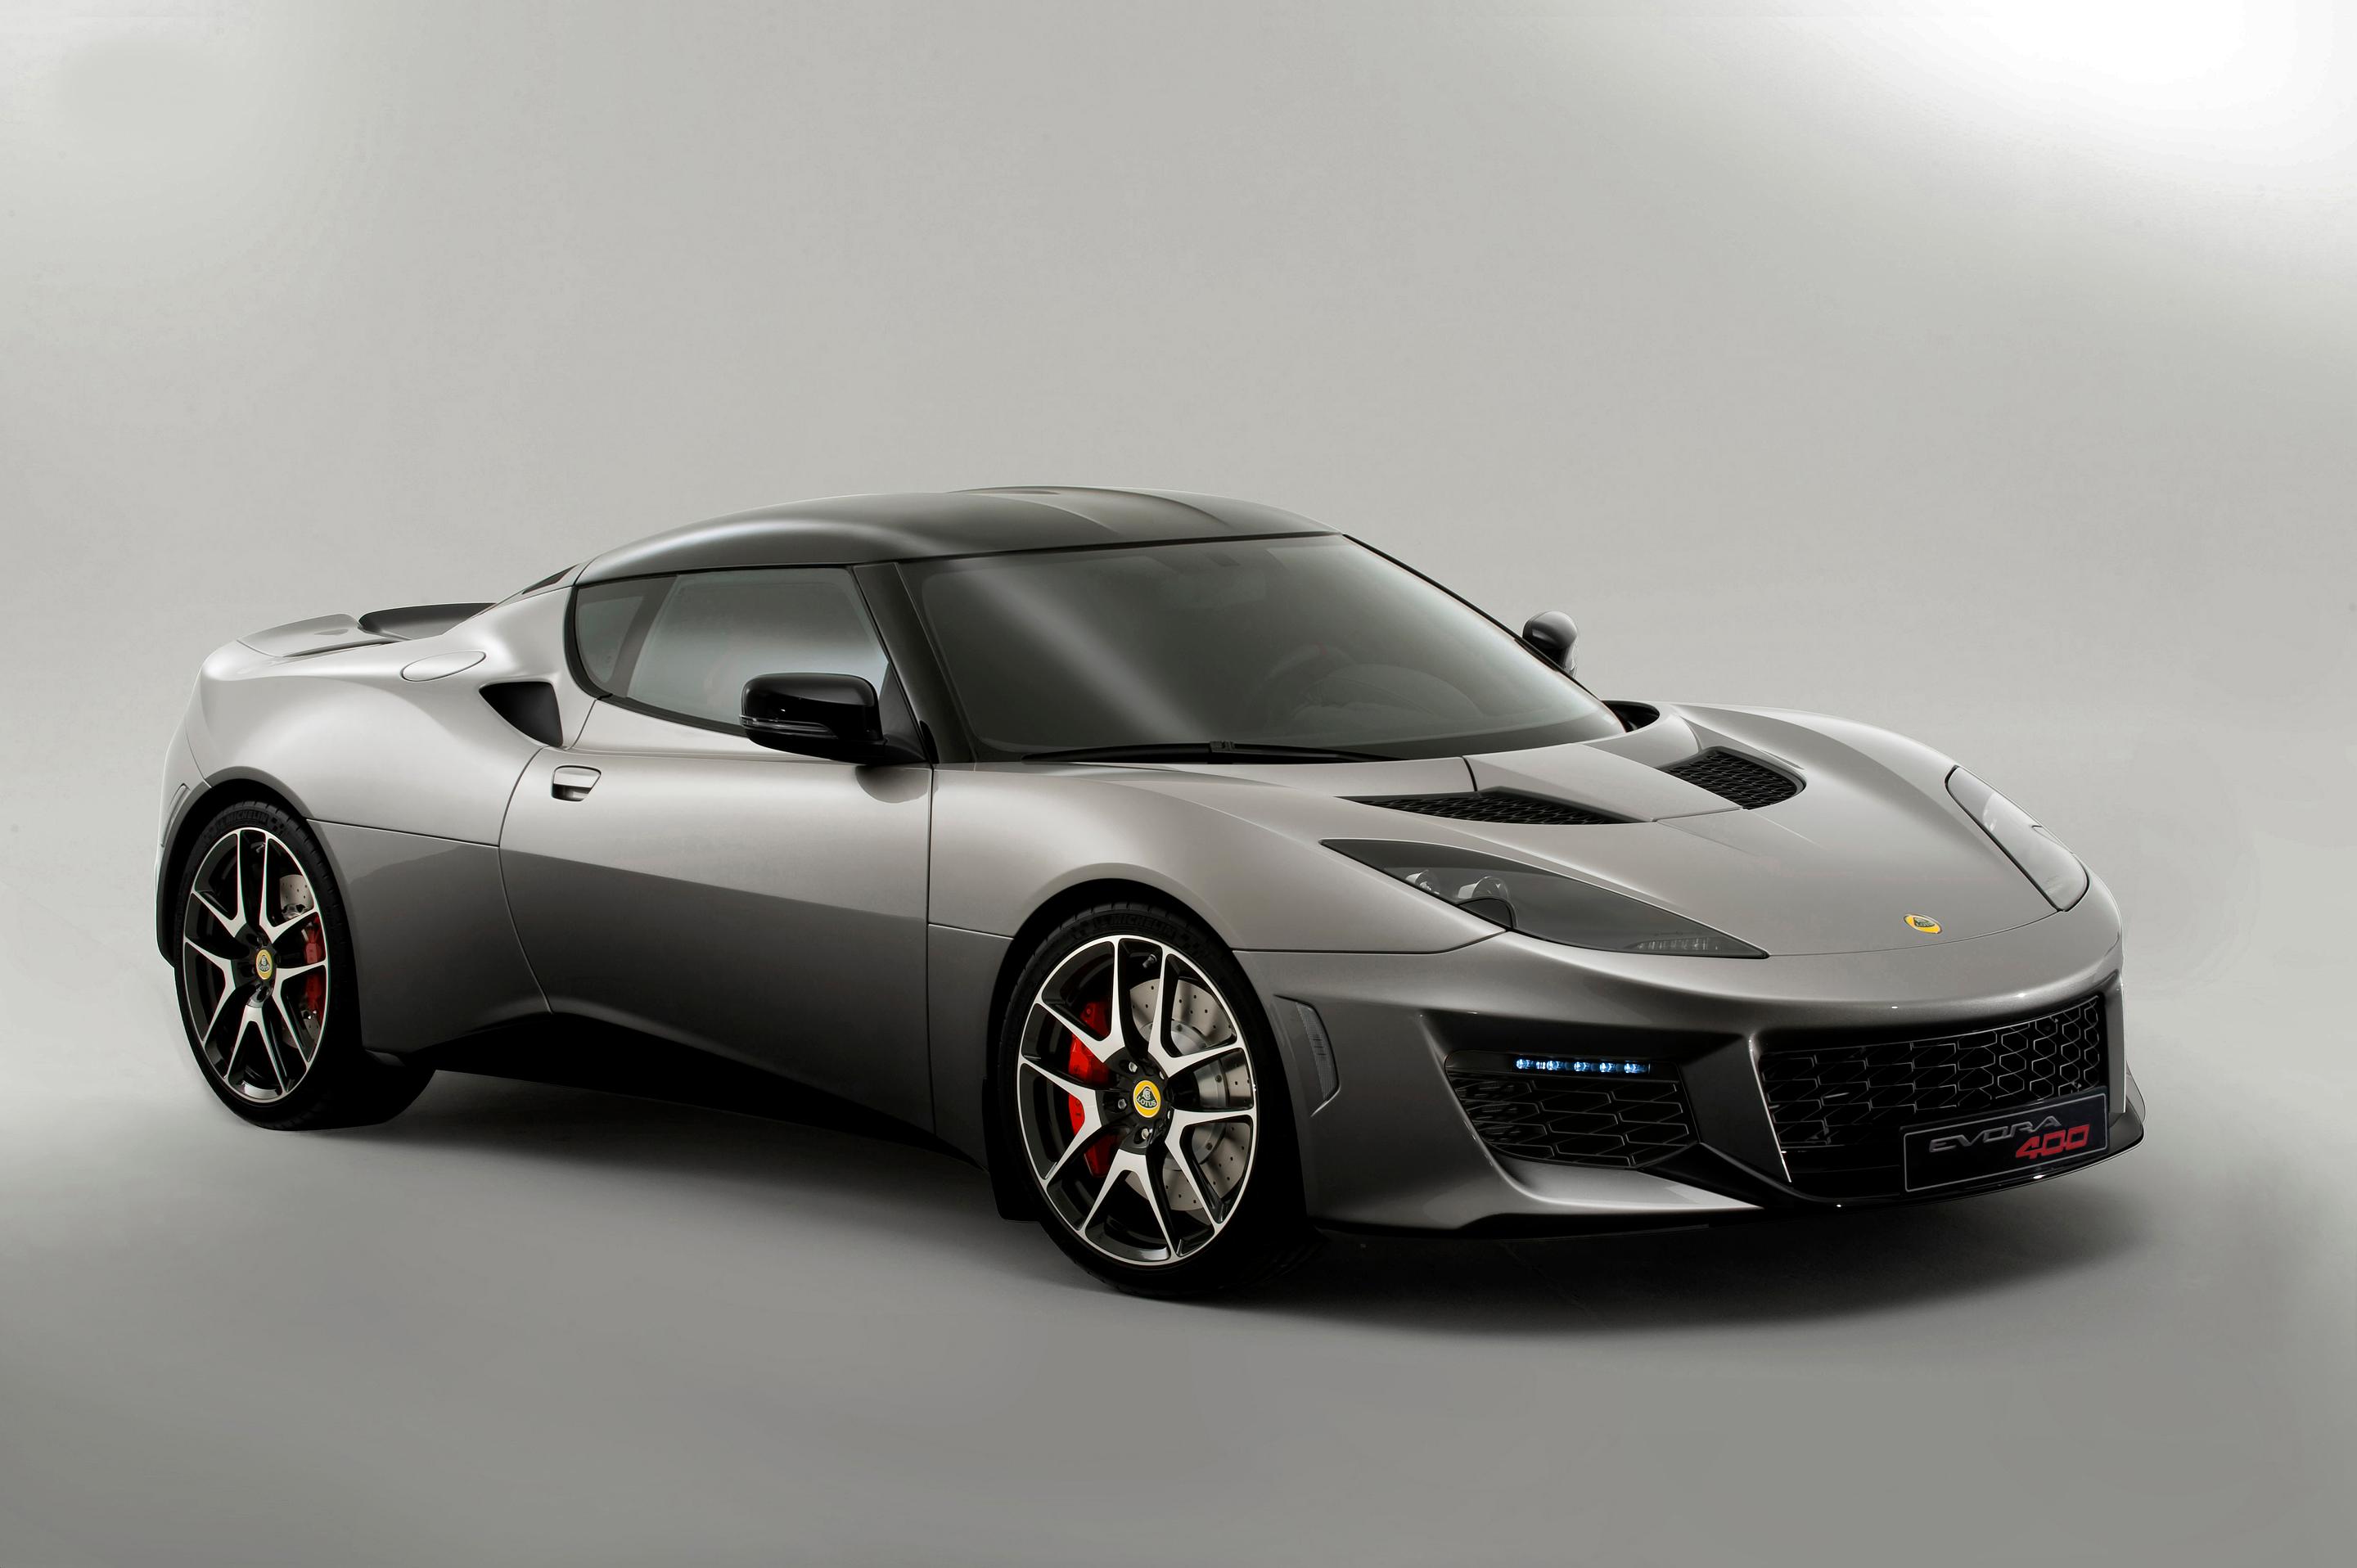 Will the new Evora 400 be the hit Lotus needs?